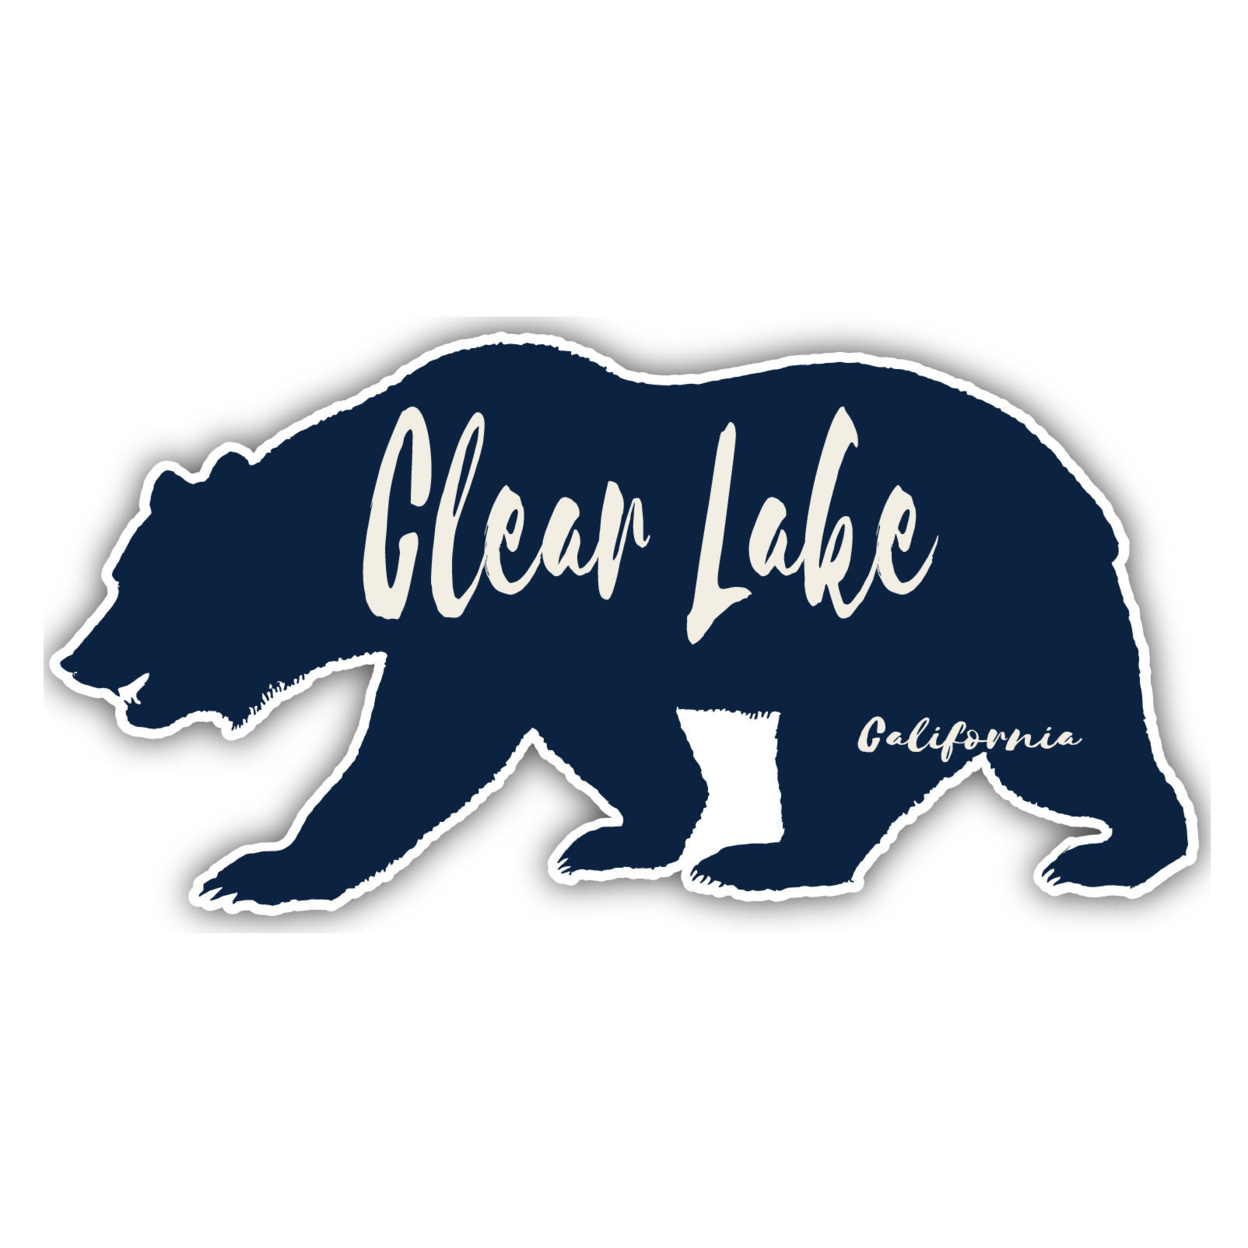 Clear Lake California Souvenir Decorative Stickers (Choose Theme And Size) - 4-Pack, 2-Inch, Bear